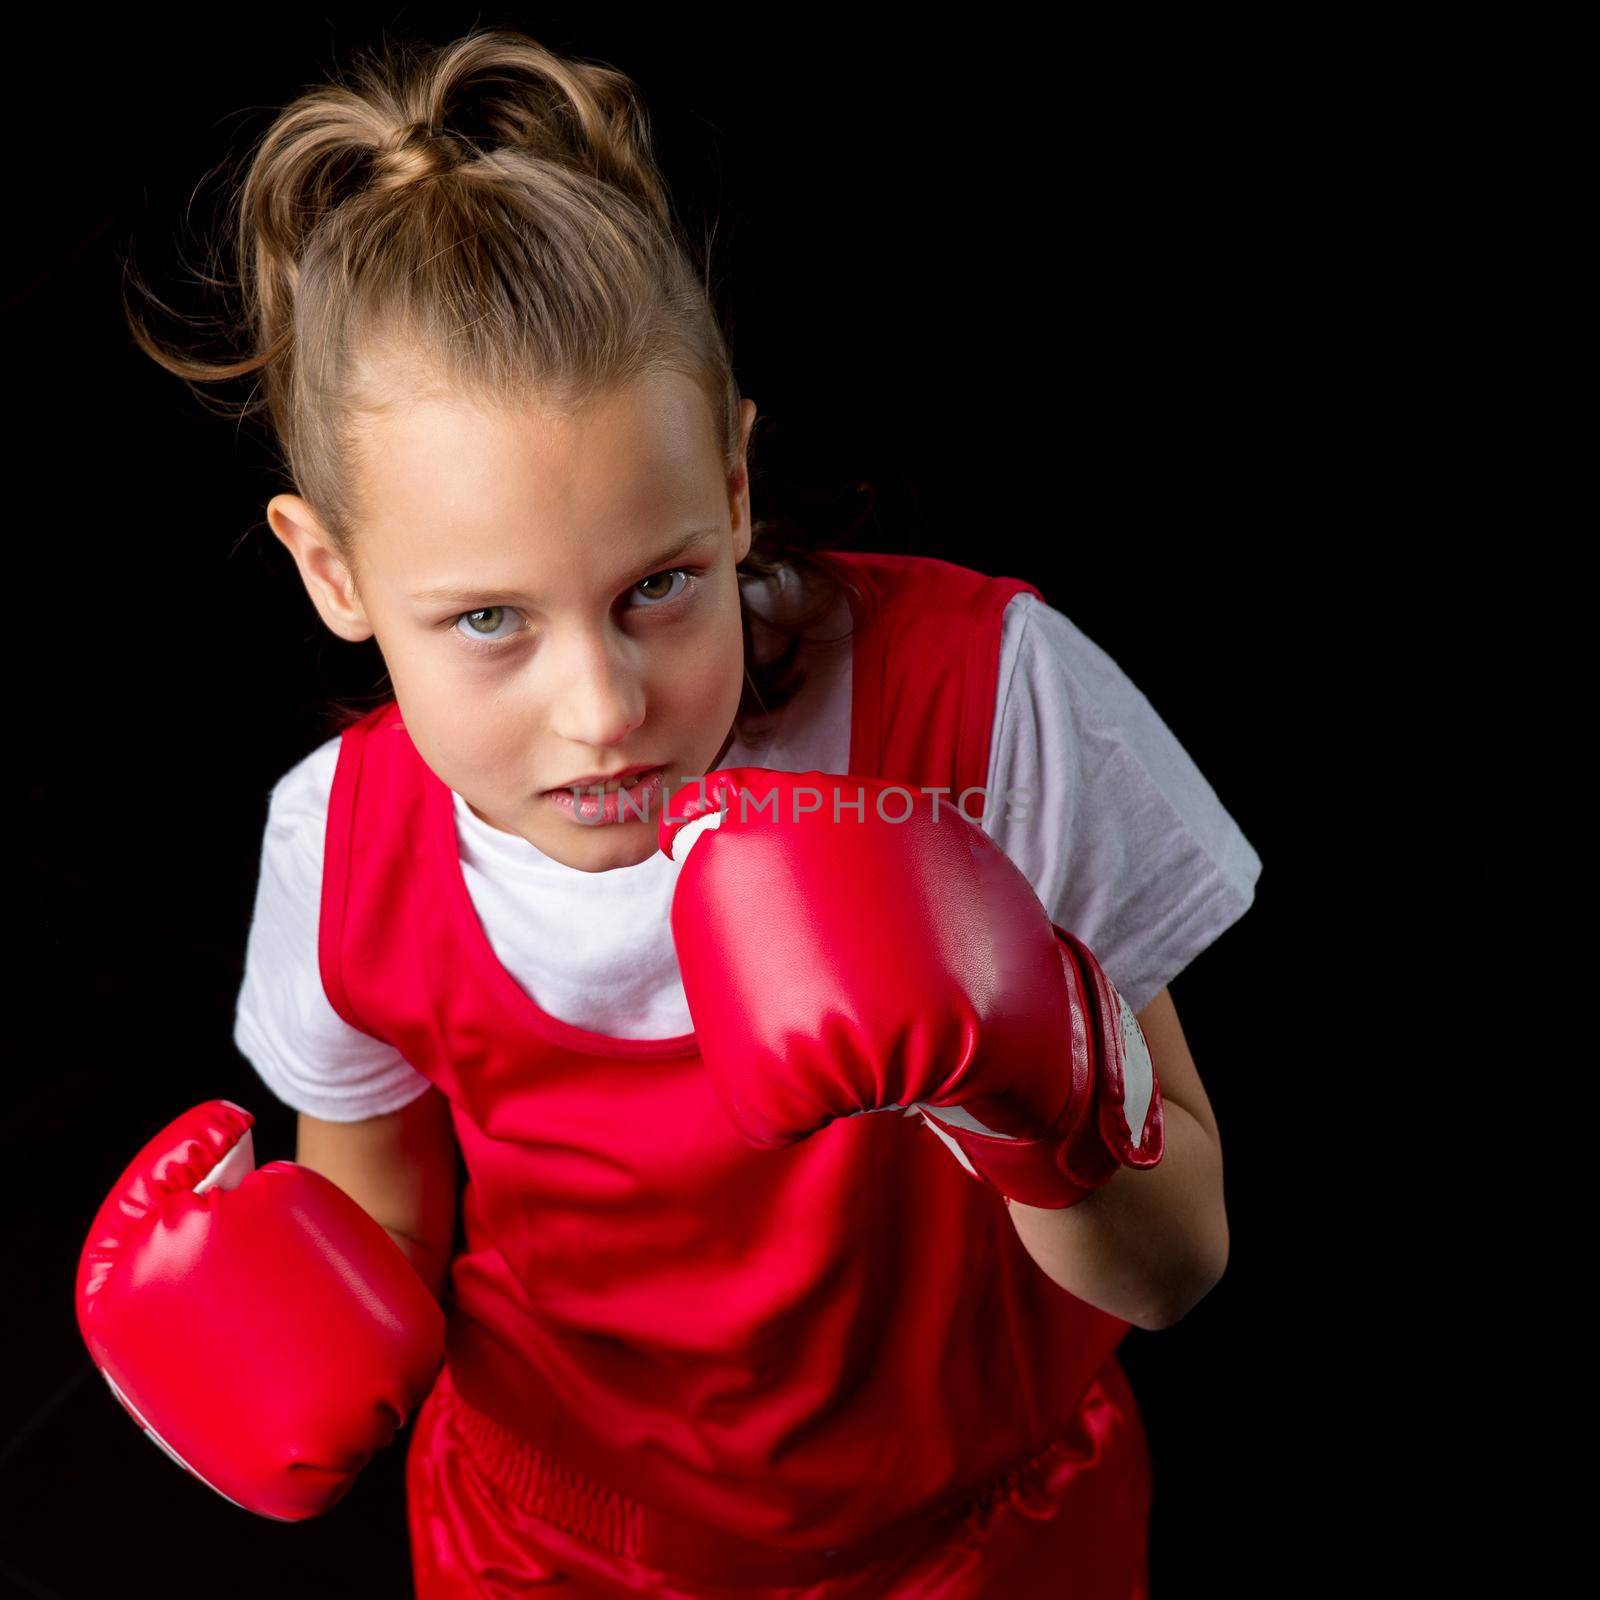 Sporty teenage girl doing boxing exercises. Close up portrait of pretty girl in red sports uniform making direct hit. Preteen child posing in studio against black background